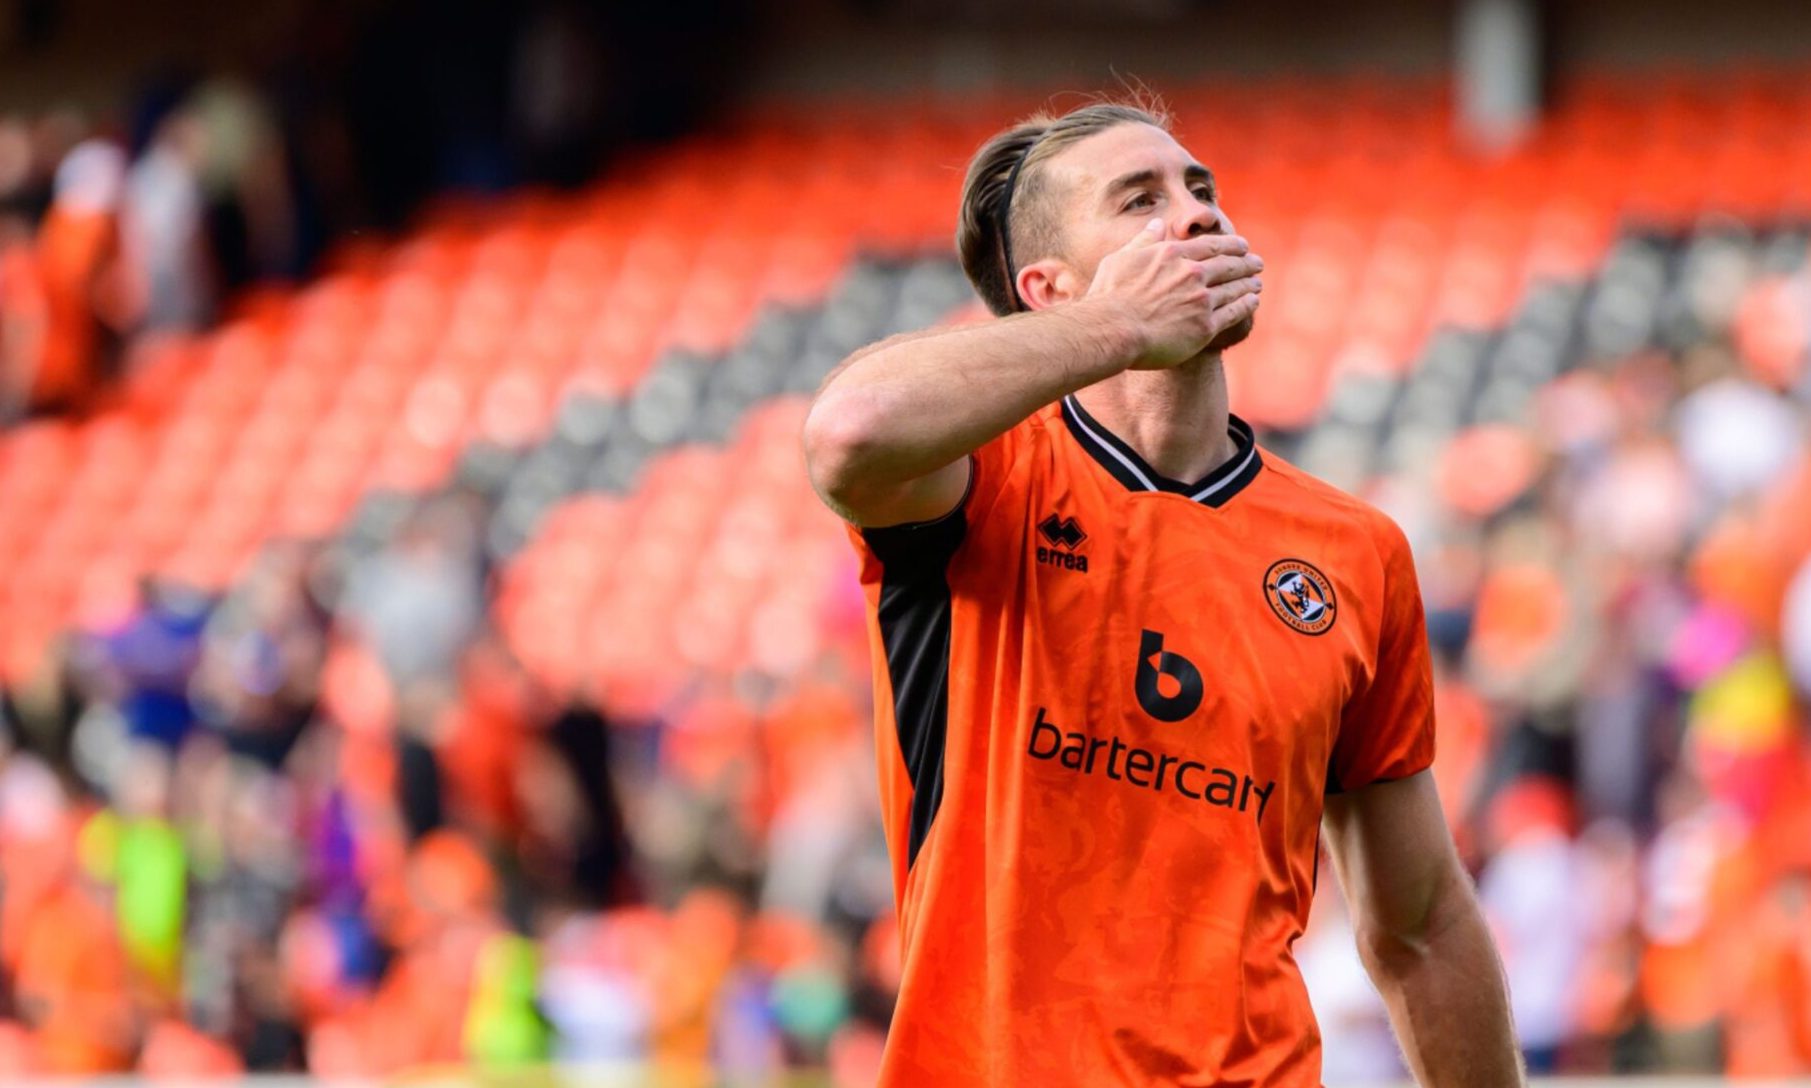 Dundee United's Declan Gallagher salutes his family in the stands during a fixture at Tannadice earlier this season.